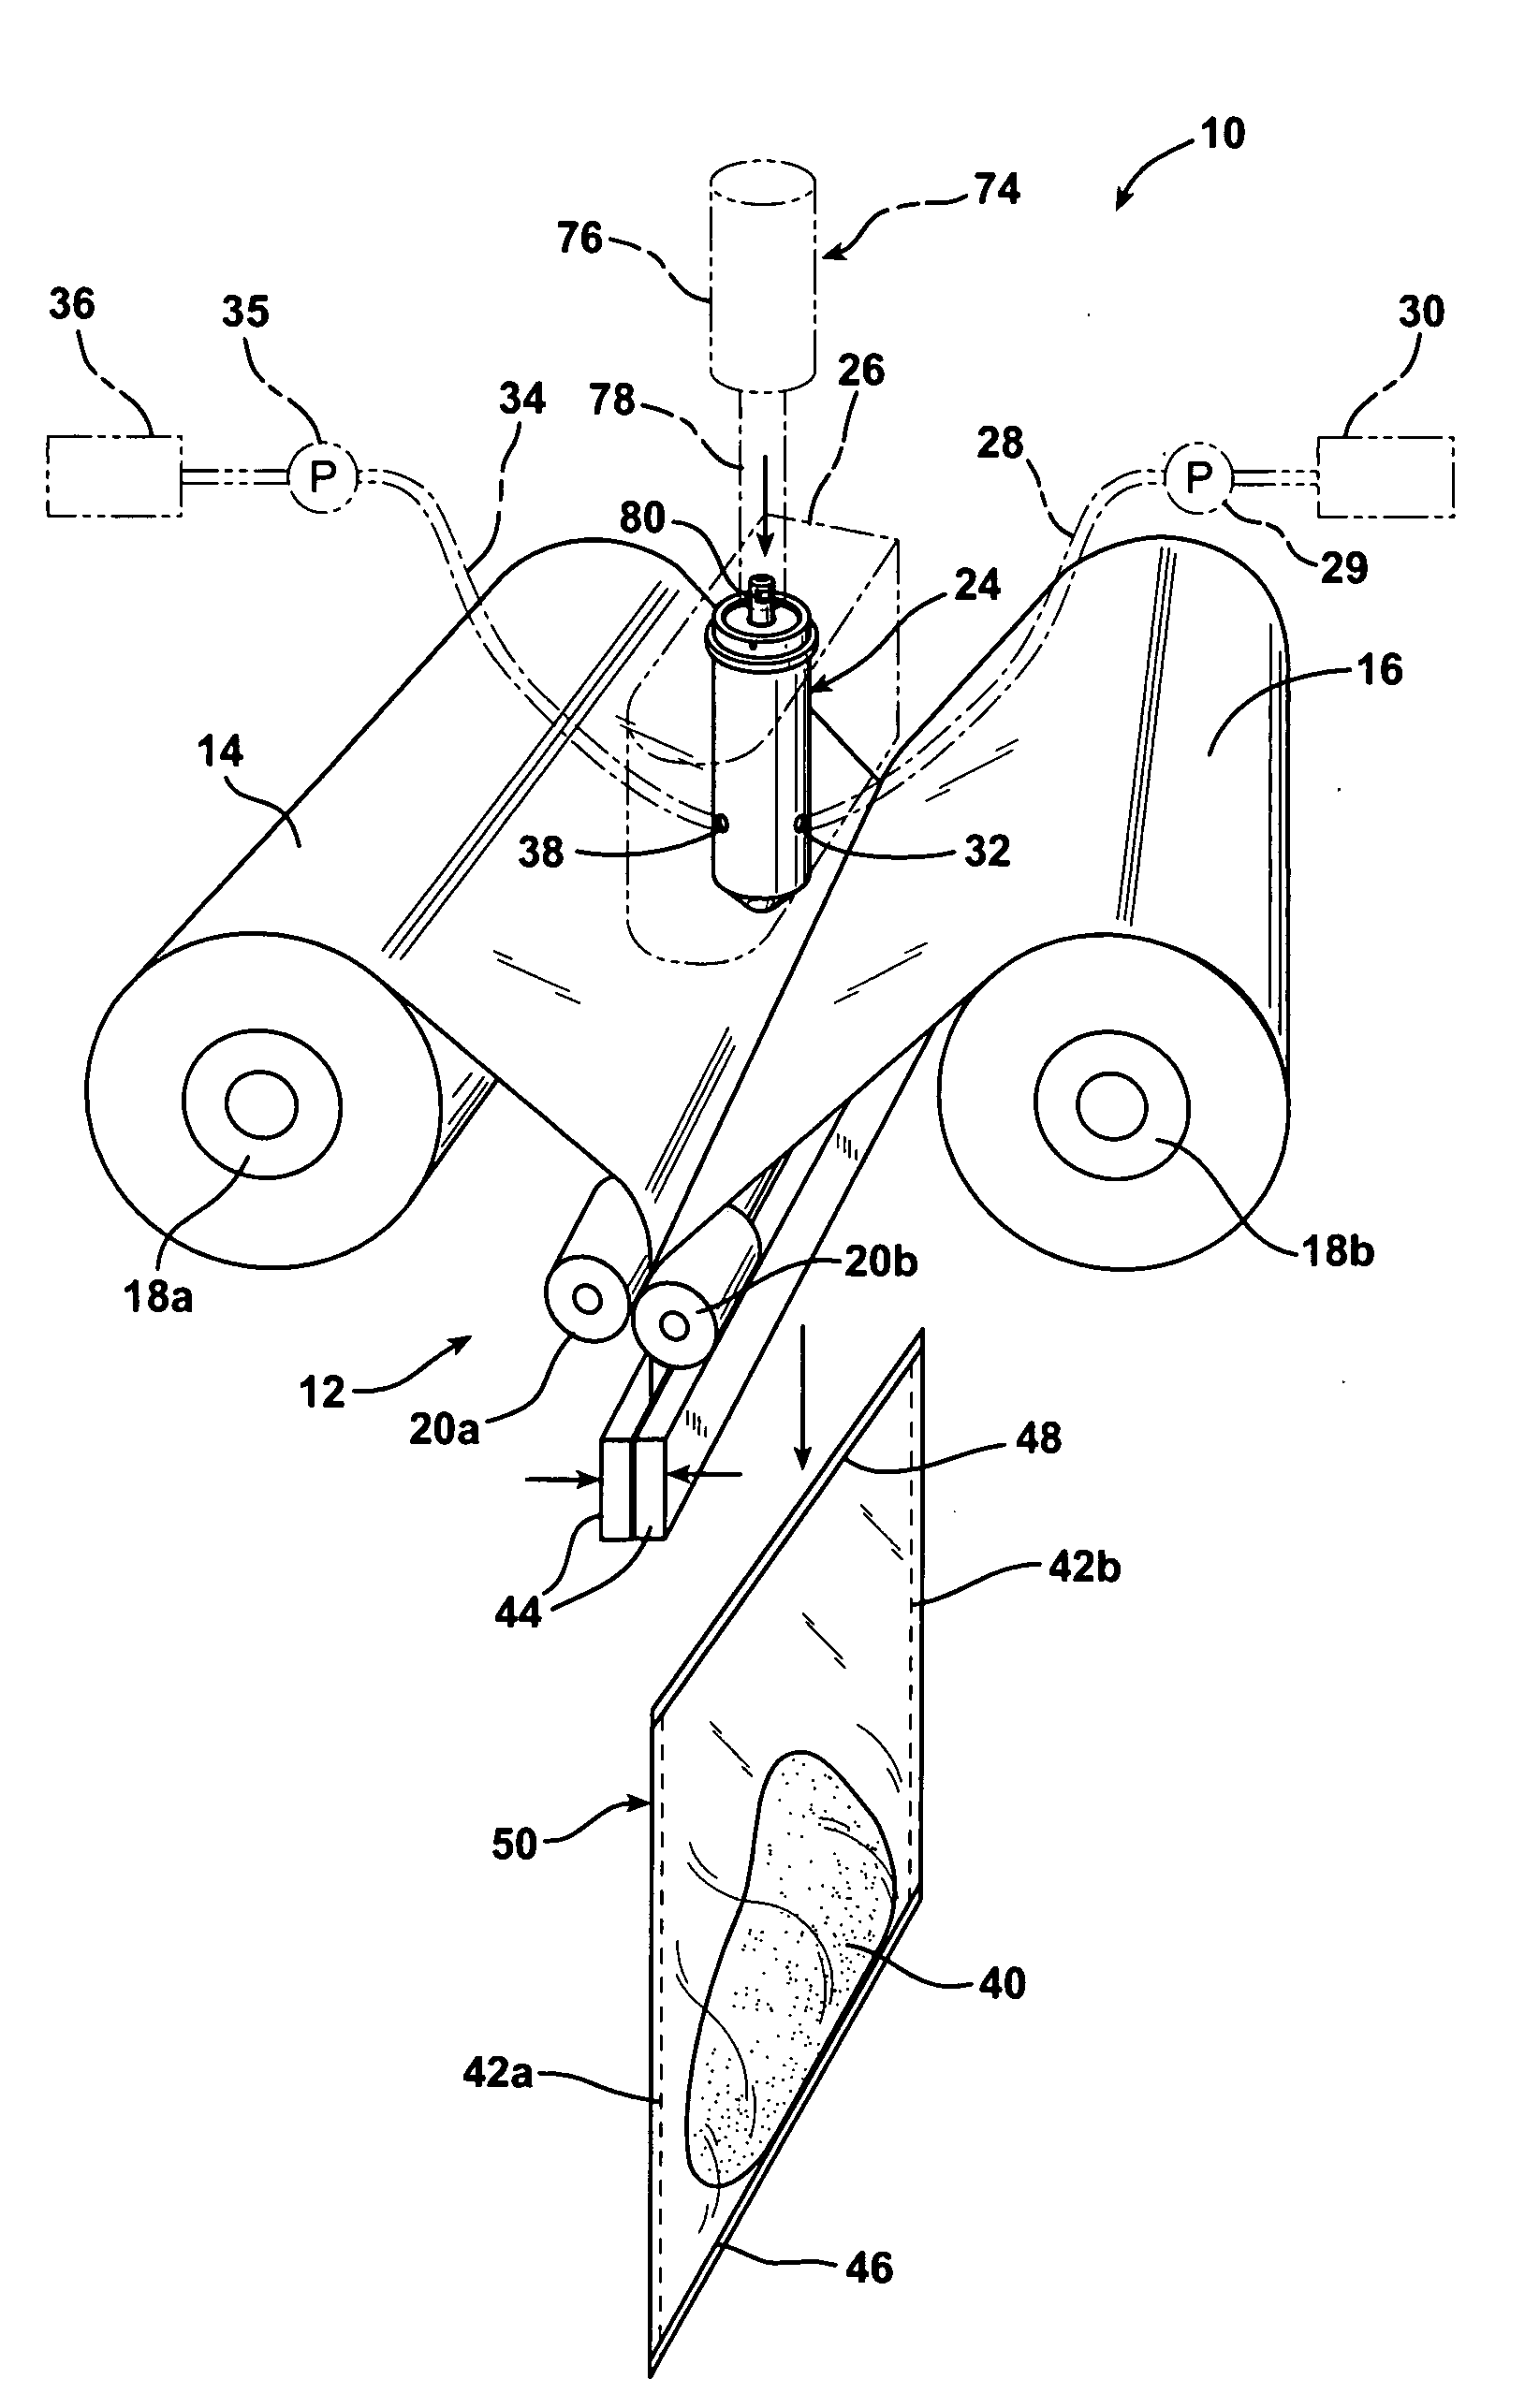 Device for mixing and dispensing fluids